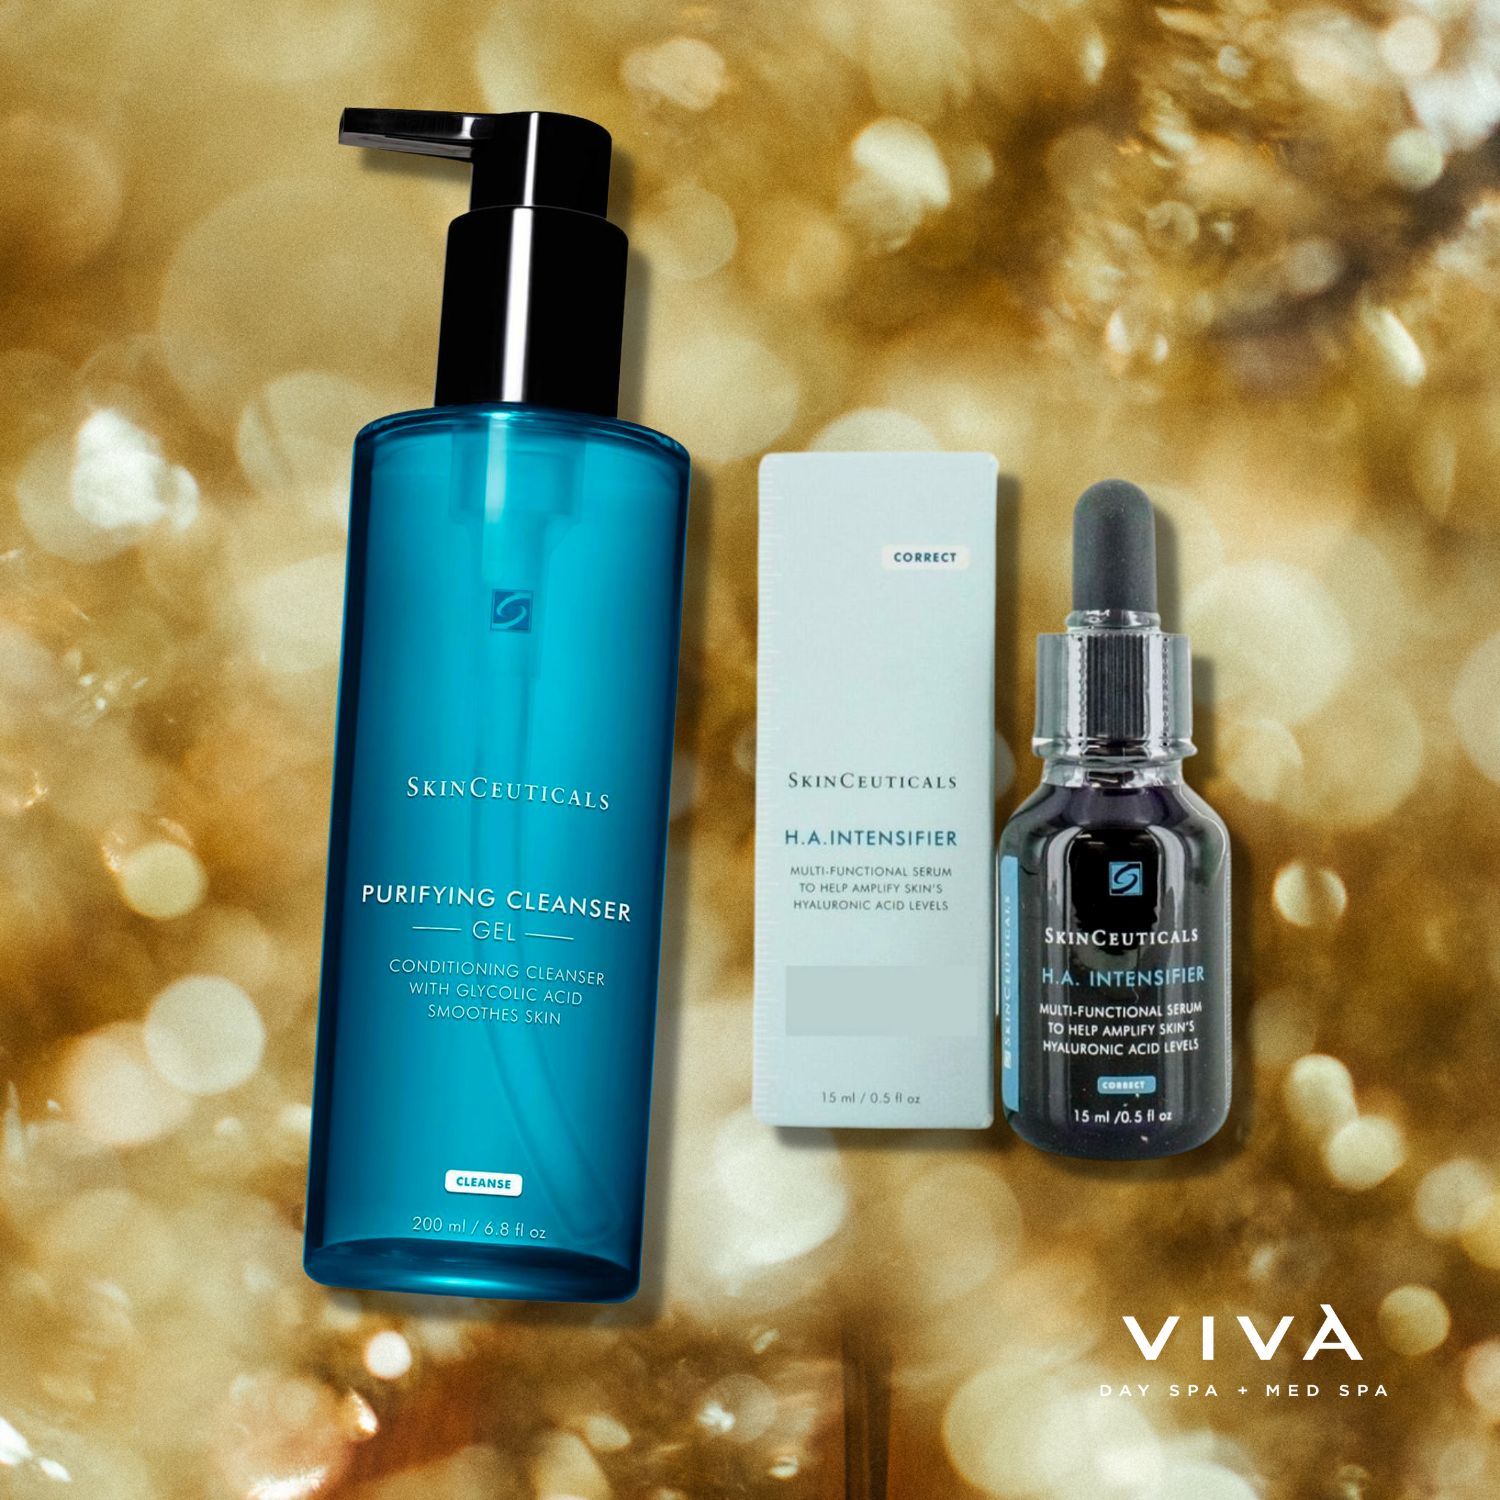 SkinCeuticals Cyber Monday Offer at Viva Day Spa + Med Spa